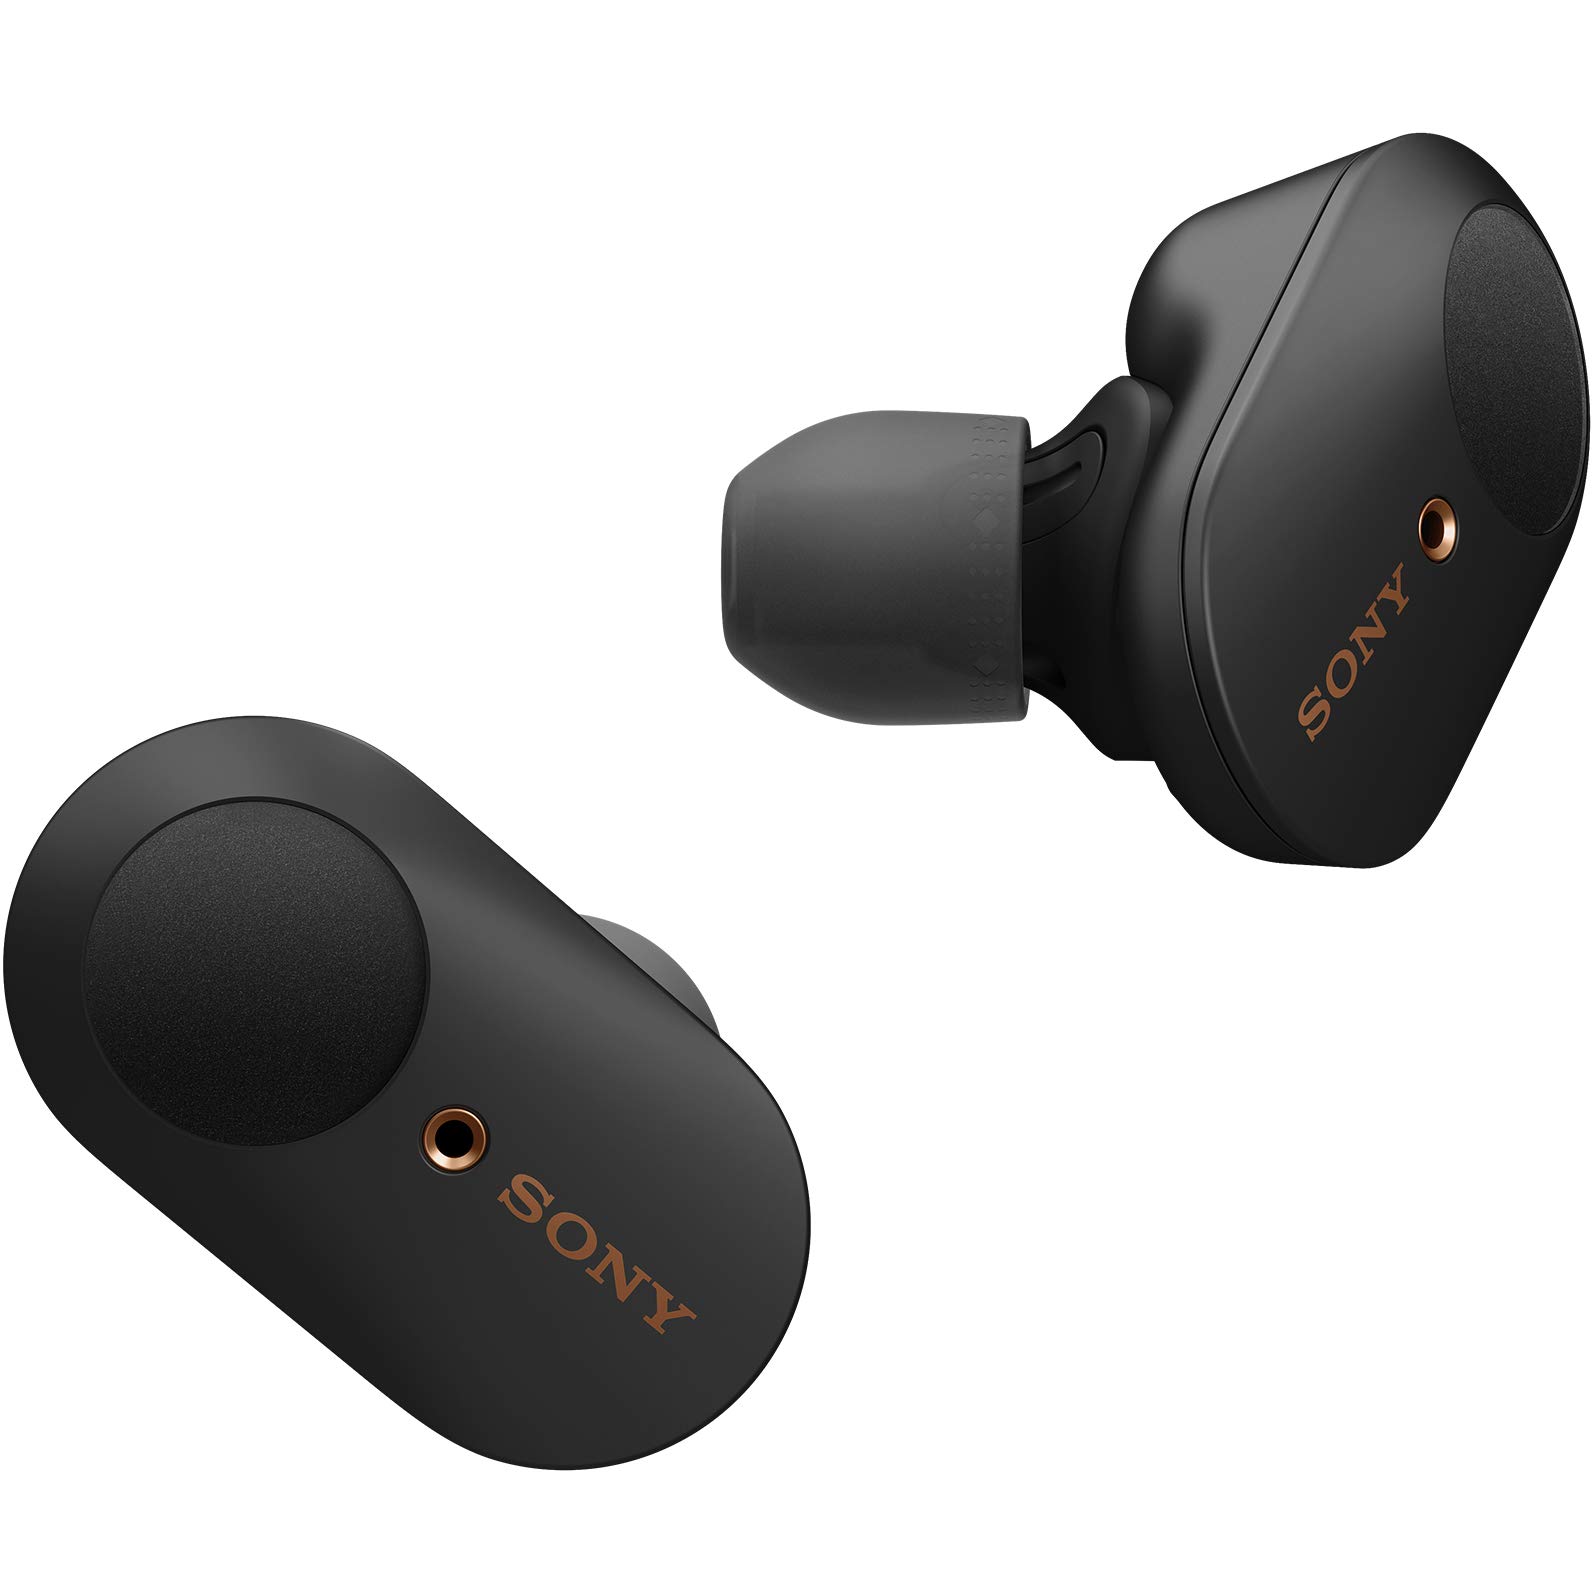 Sony WF-1000XM3 Noise Canceling Wireless Earbuds $128 + Free Shipping